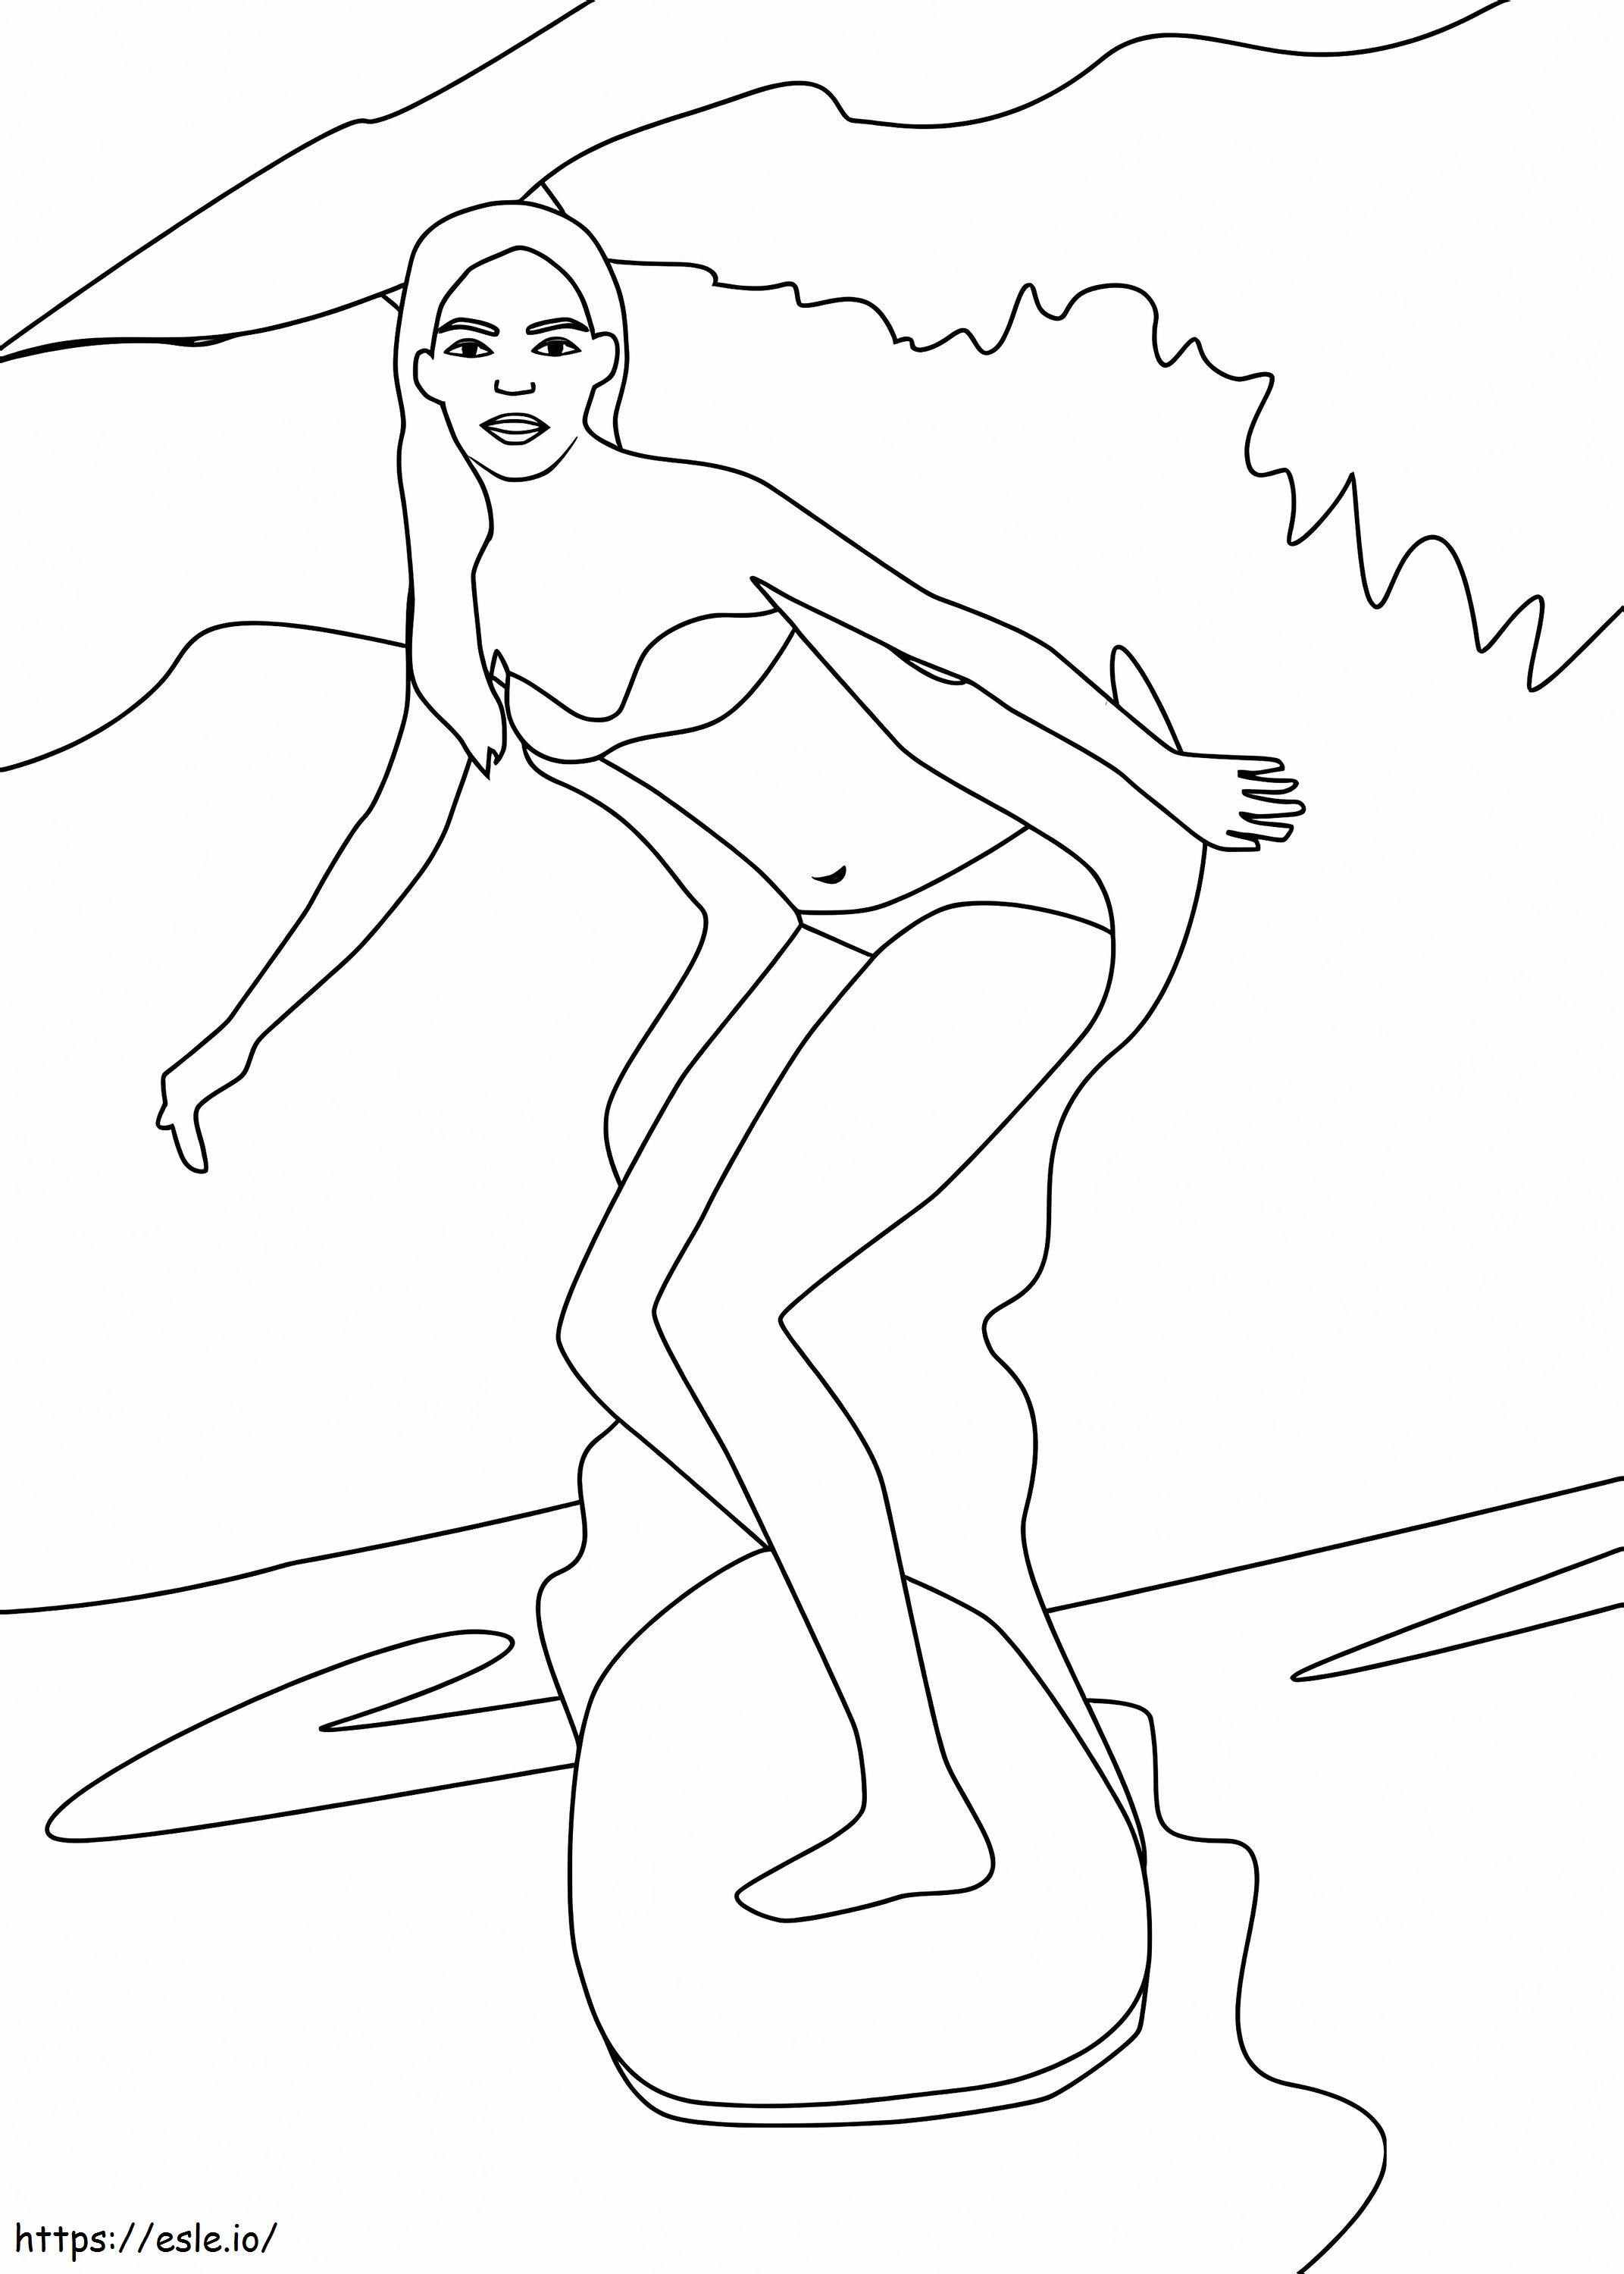 Printable Surfing coloring page